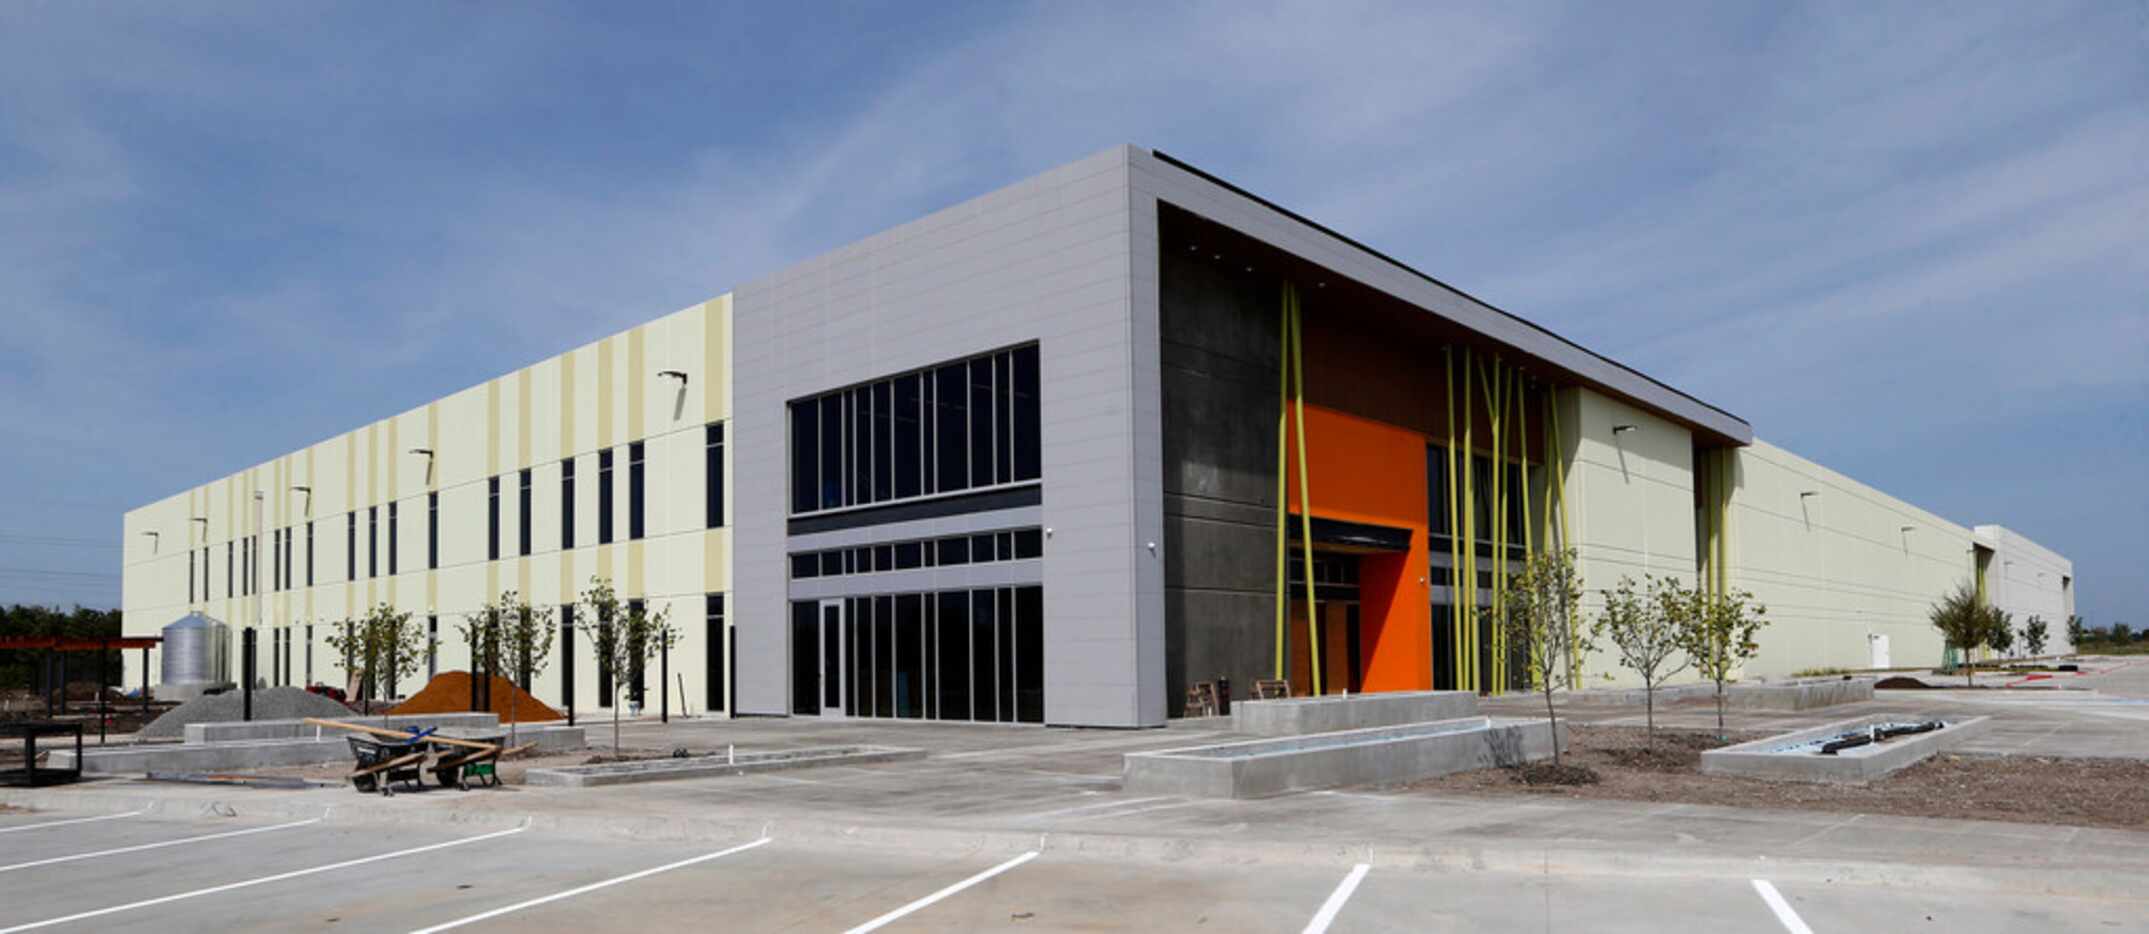 The new food bank facility in Plano has twice the space and triple the refrigerated storage...